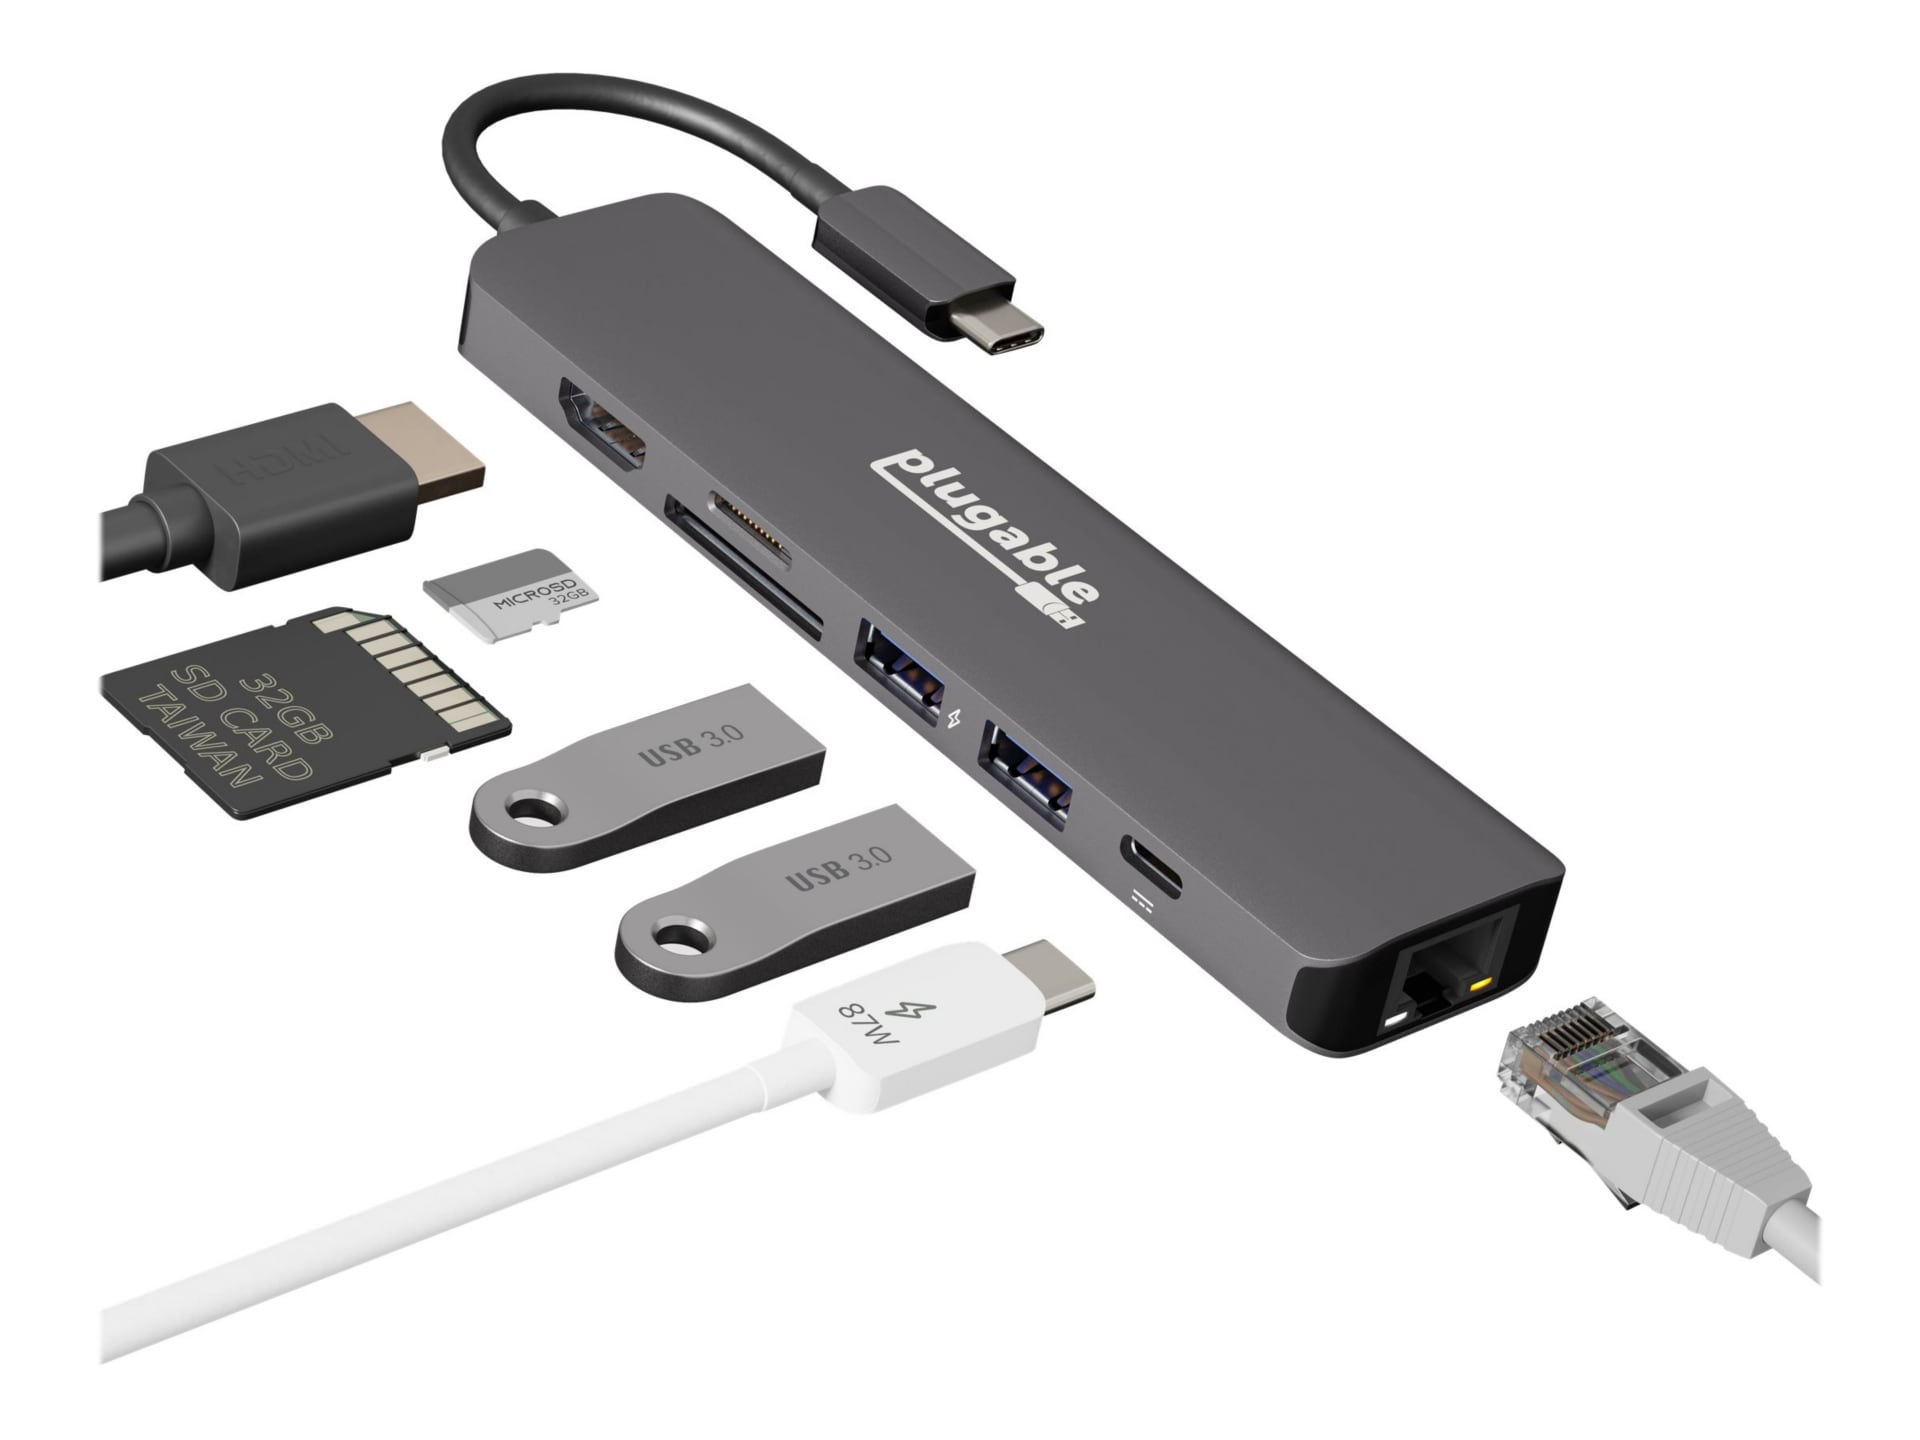 Plugable 7-in-1 USB C Hub Multiport Adapter with Ethernet - USBC